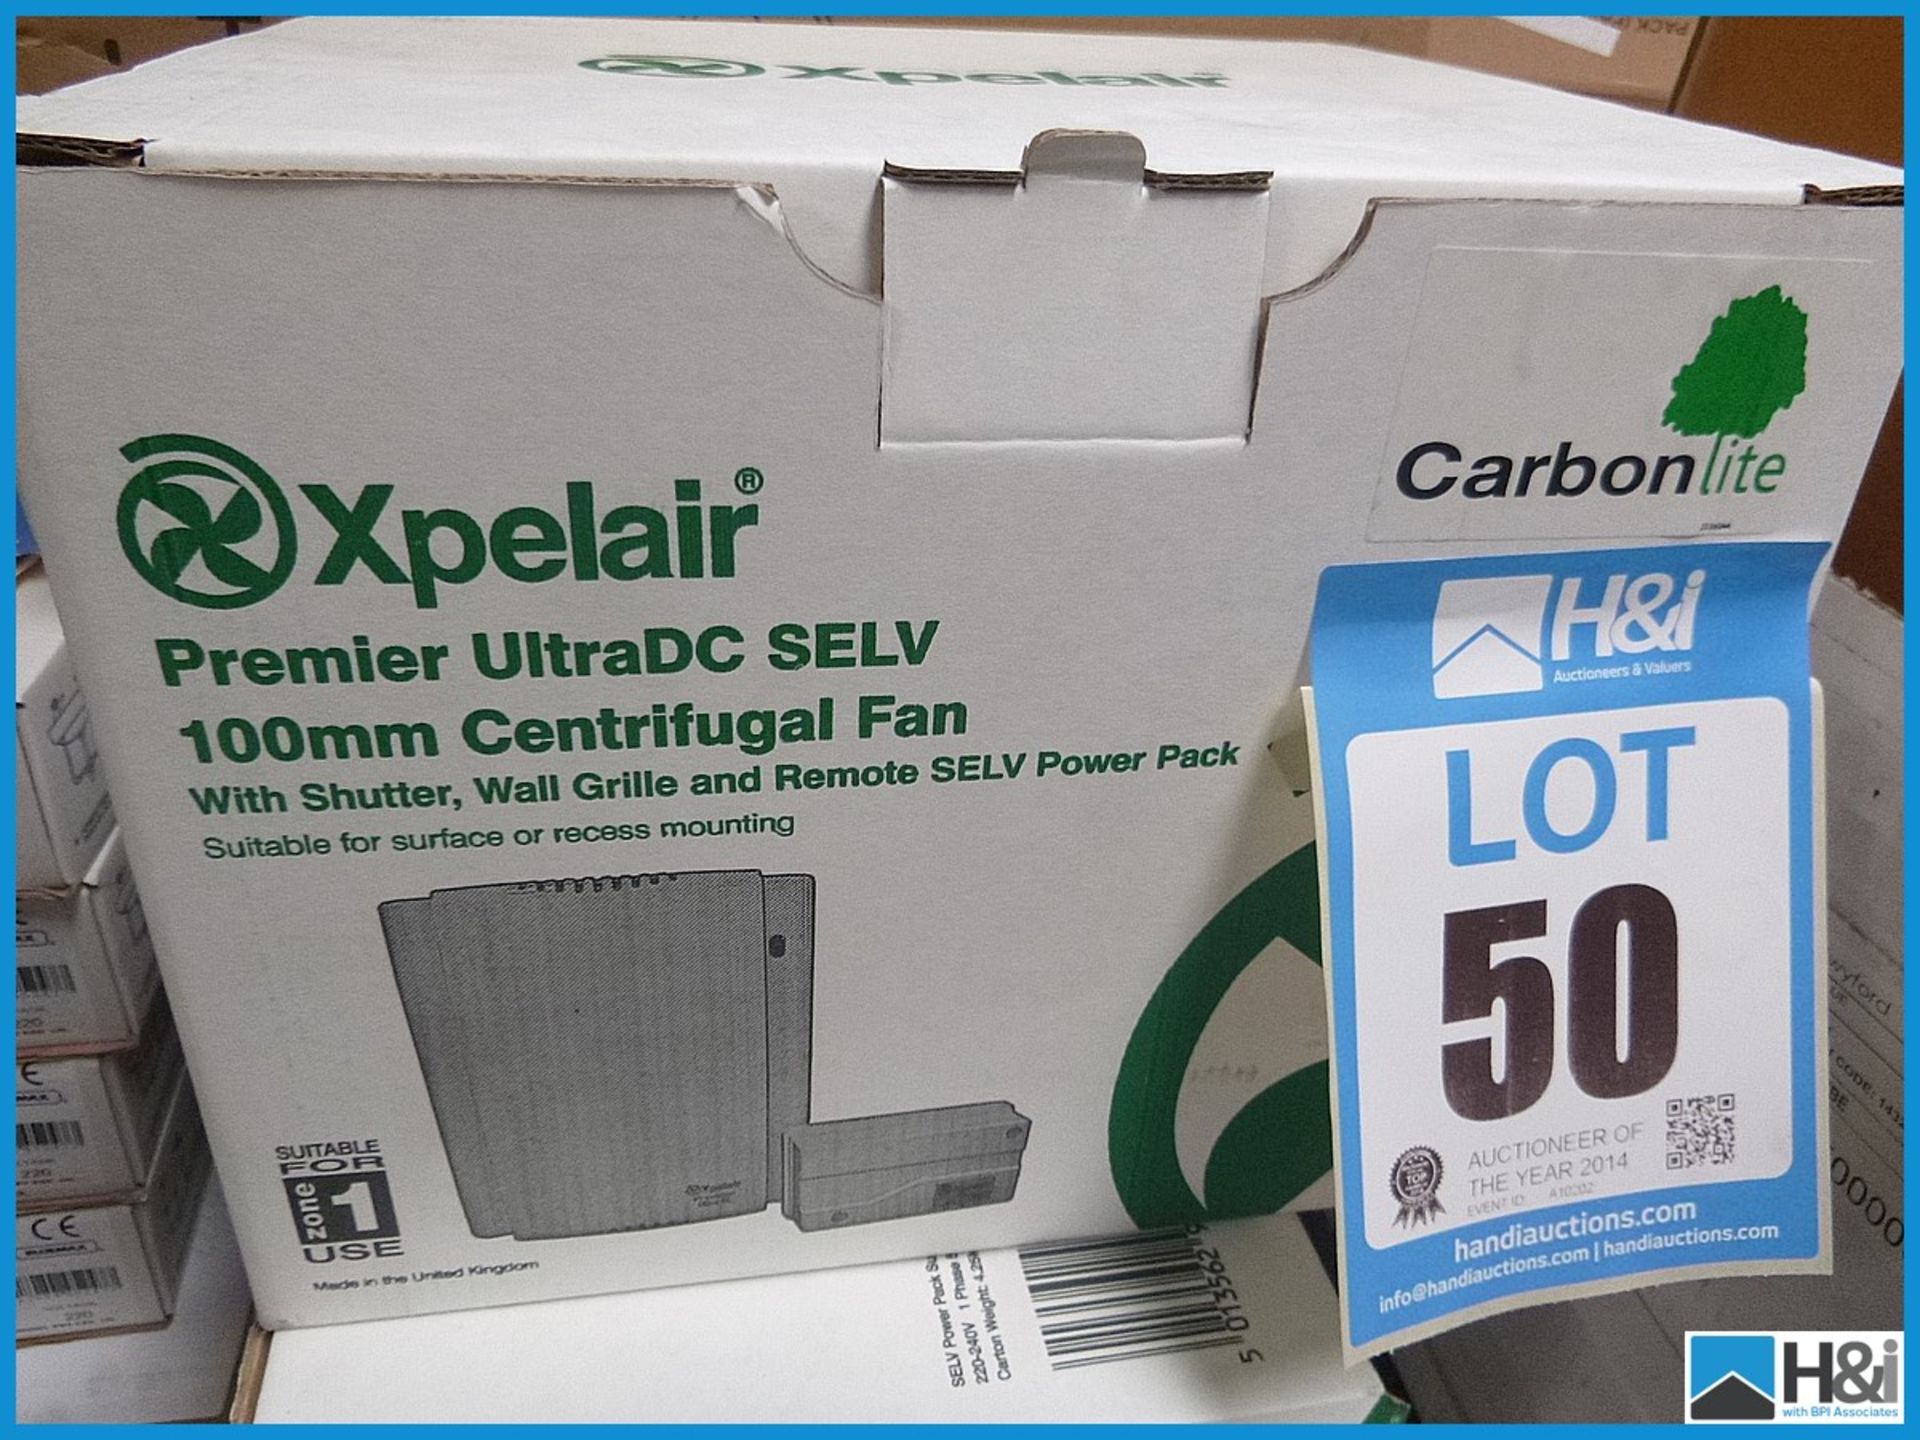 Xpelair premier UltraDC SELV 100MM centrifugal fan. New and boxed RRP £129 Appraisal: Viewing